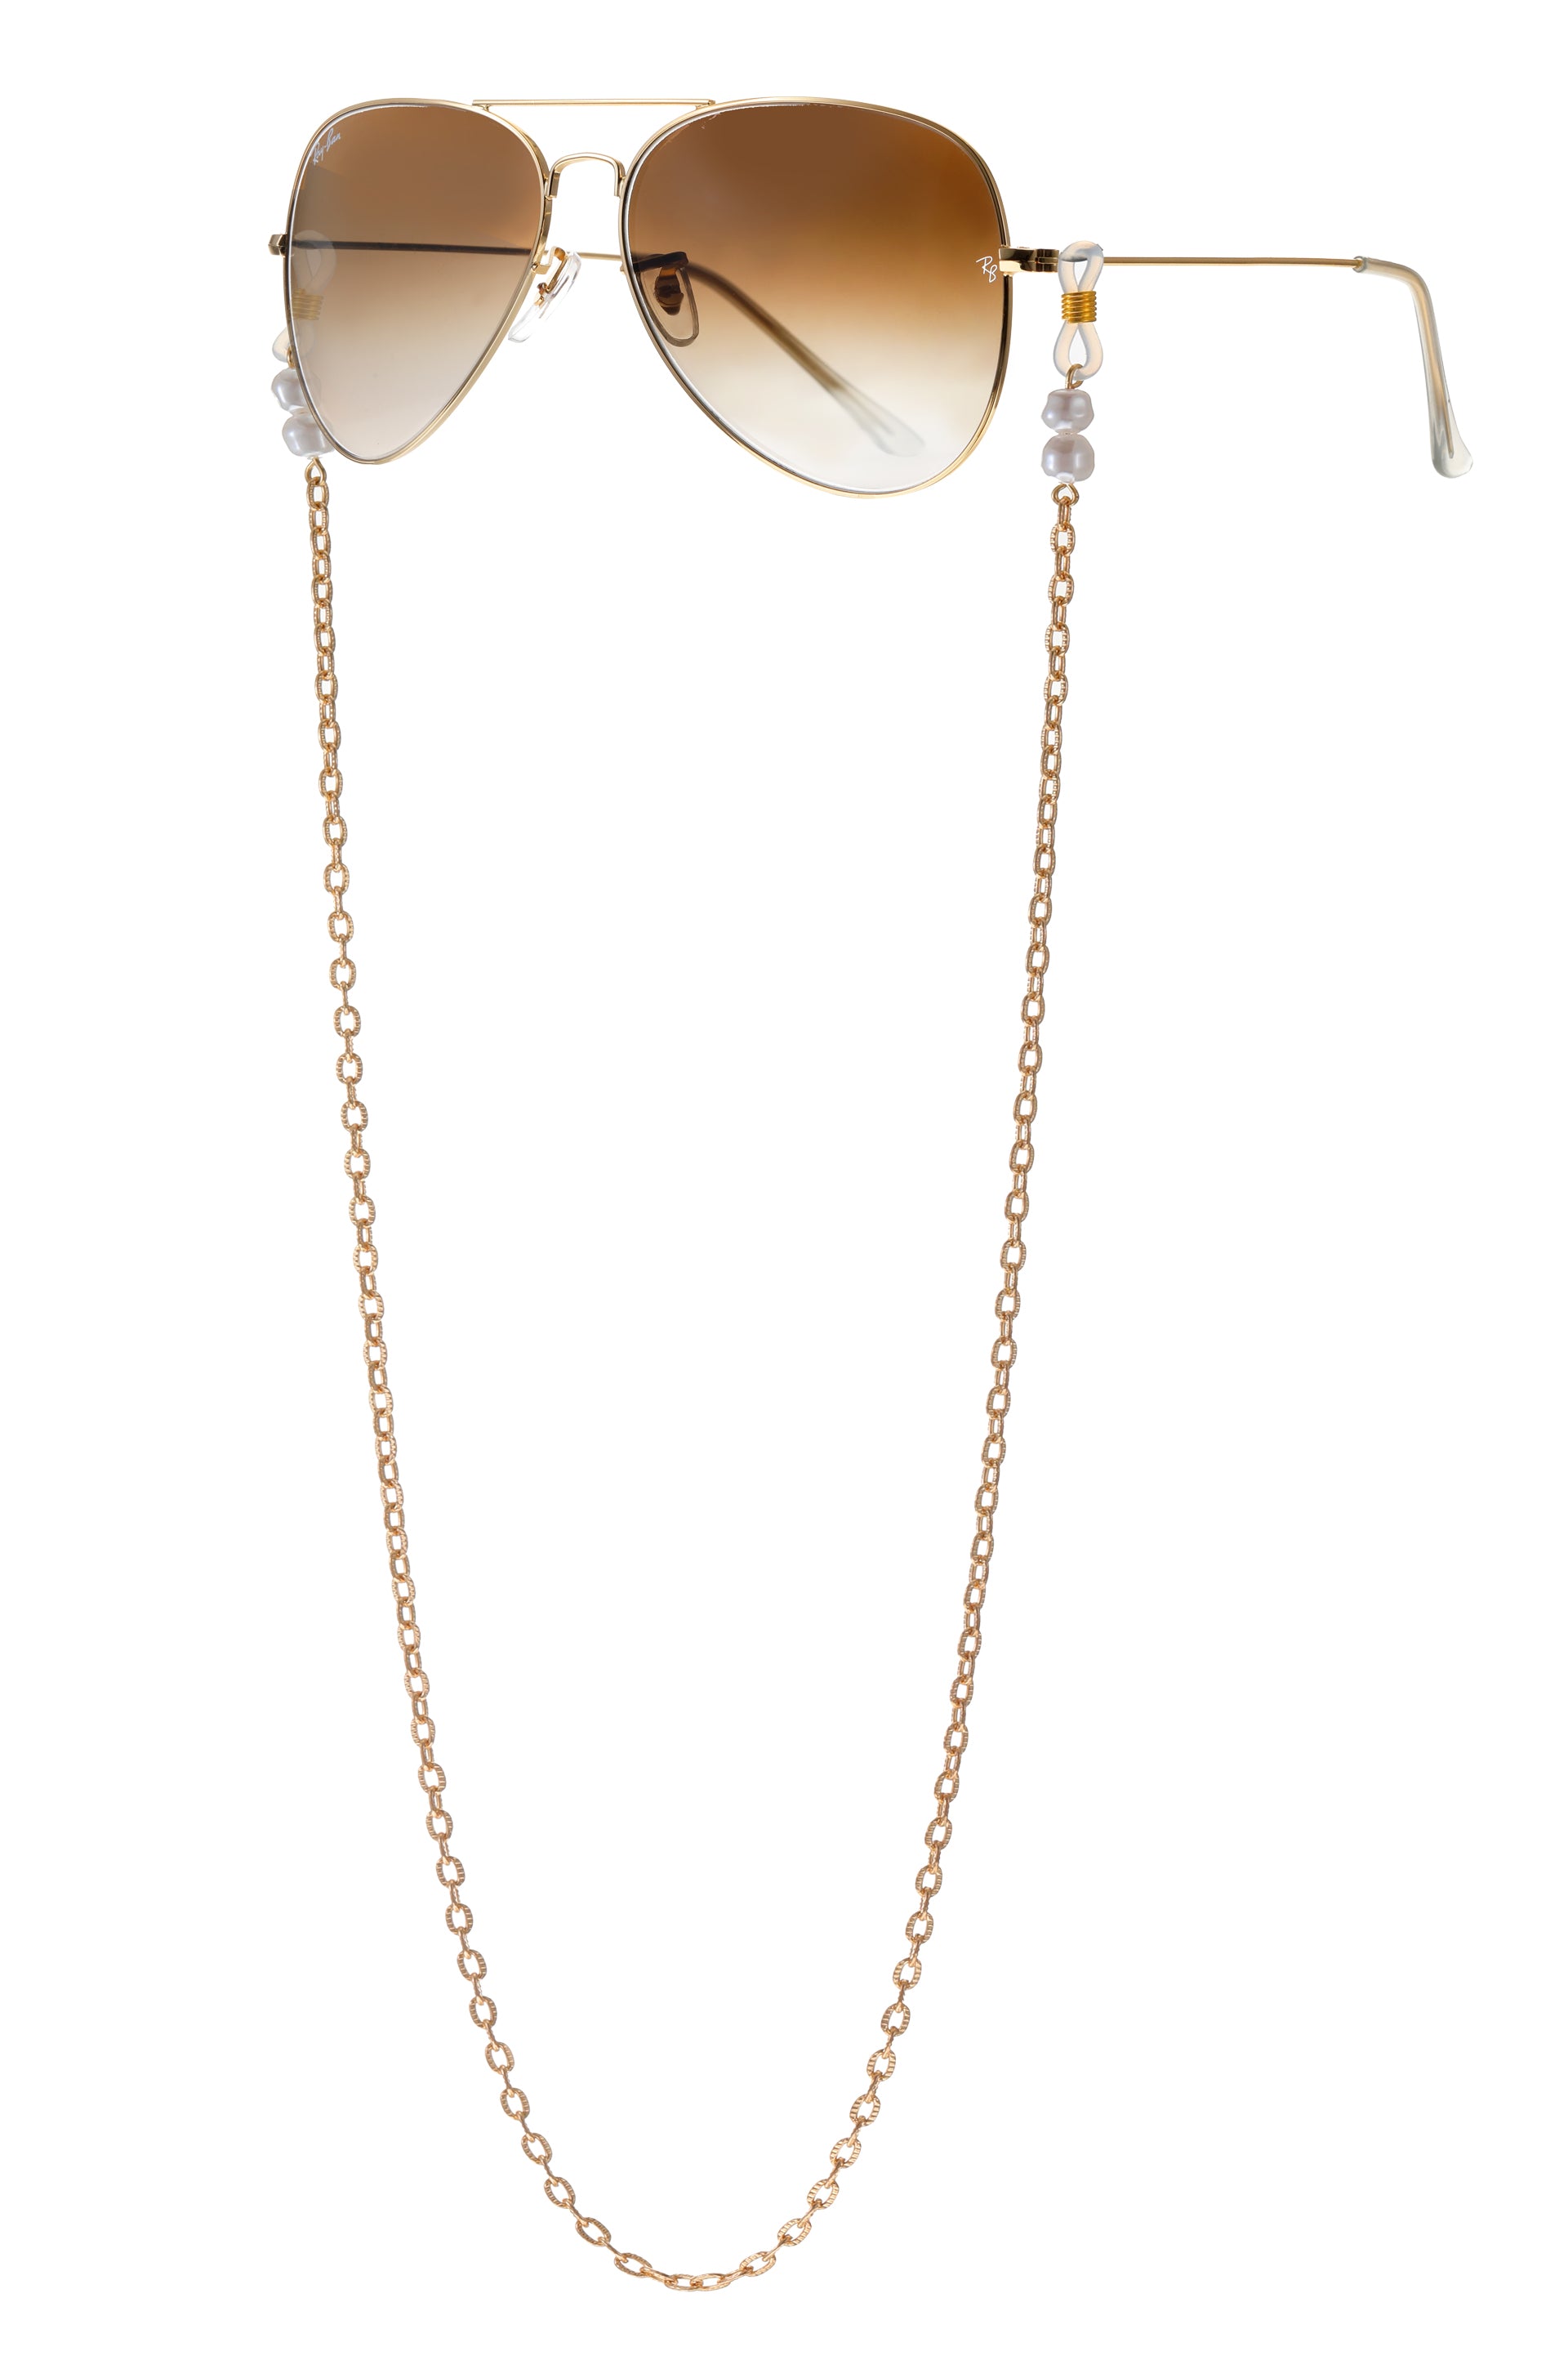 Wide Link Pearl Glasses Chain on white